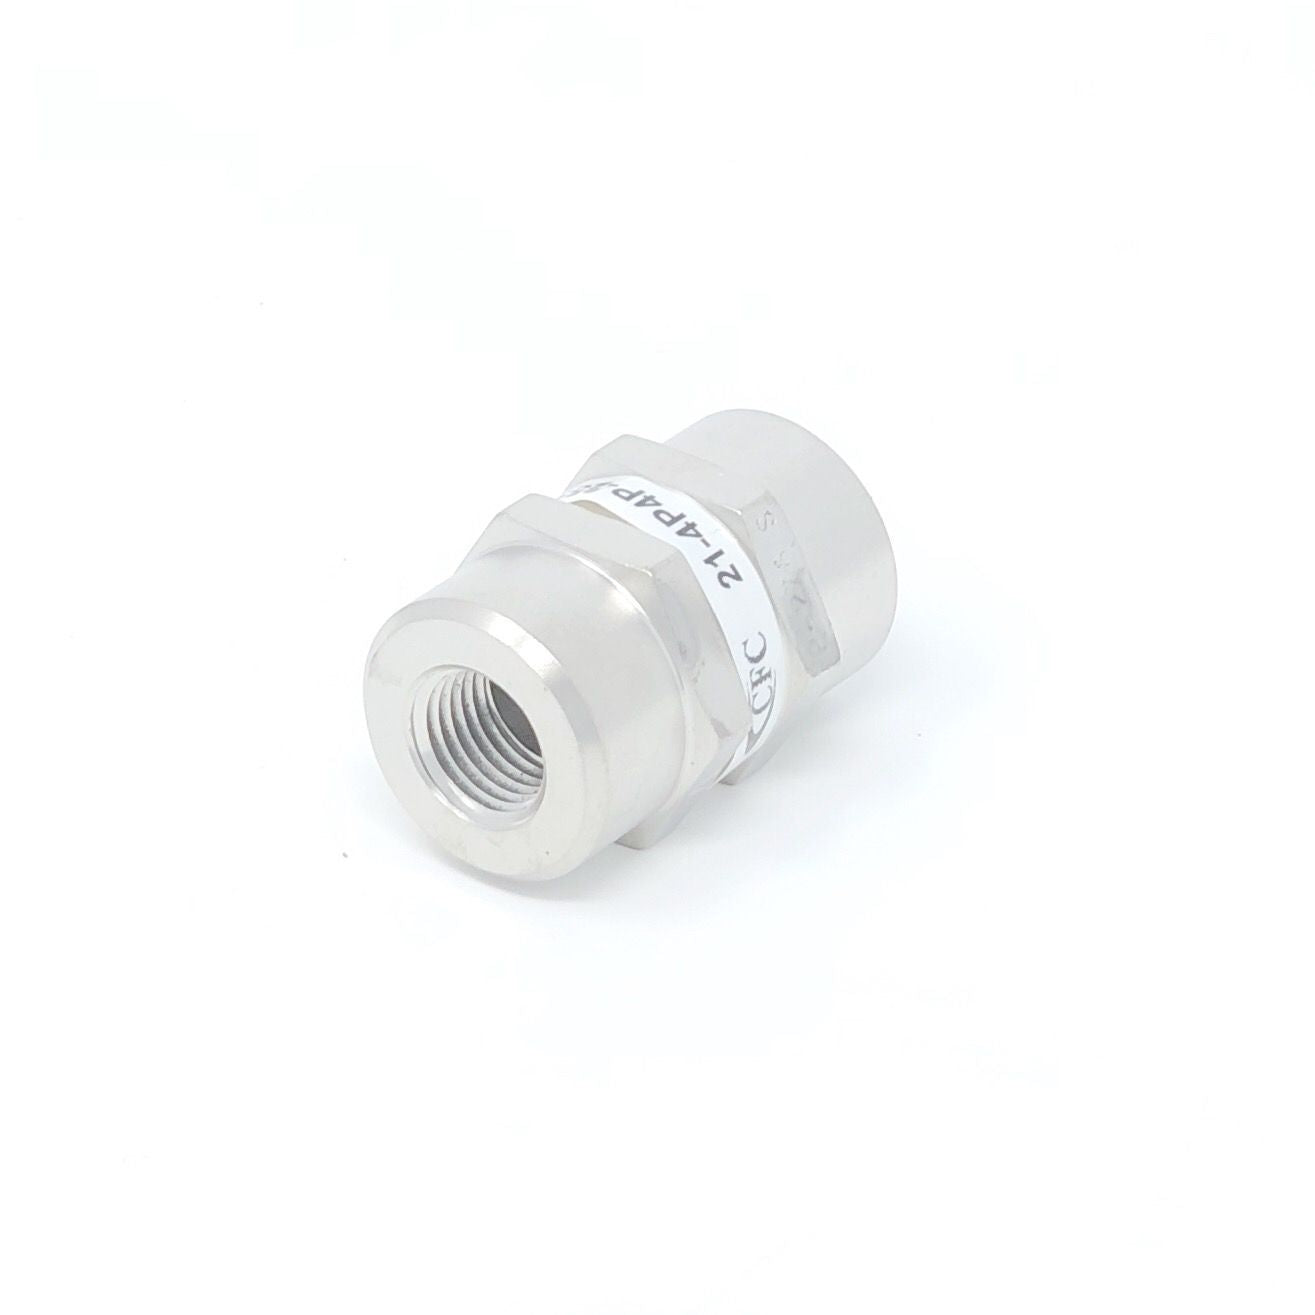 21-12N12N-25S : Chase High Pressure Inline Filter, 3000psi, 3/4" NPT, 25 Micron, No Visual Indicator, No Bypass